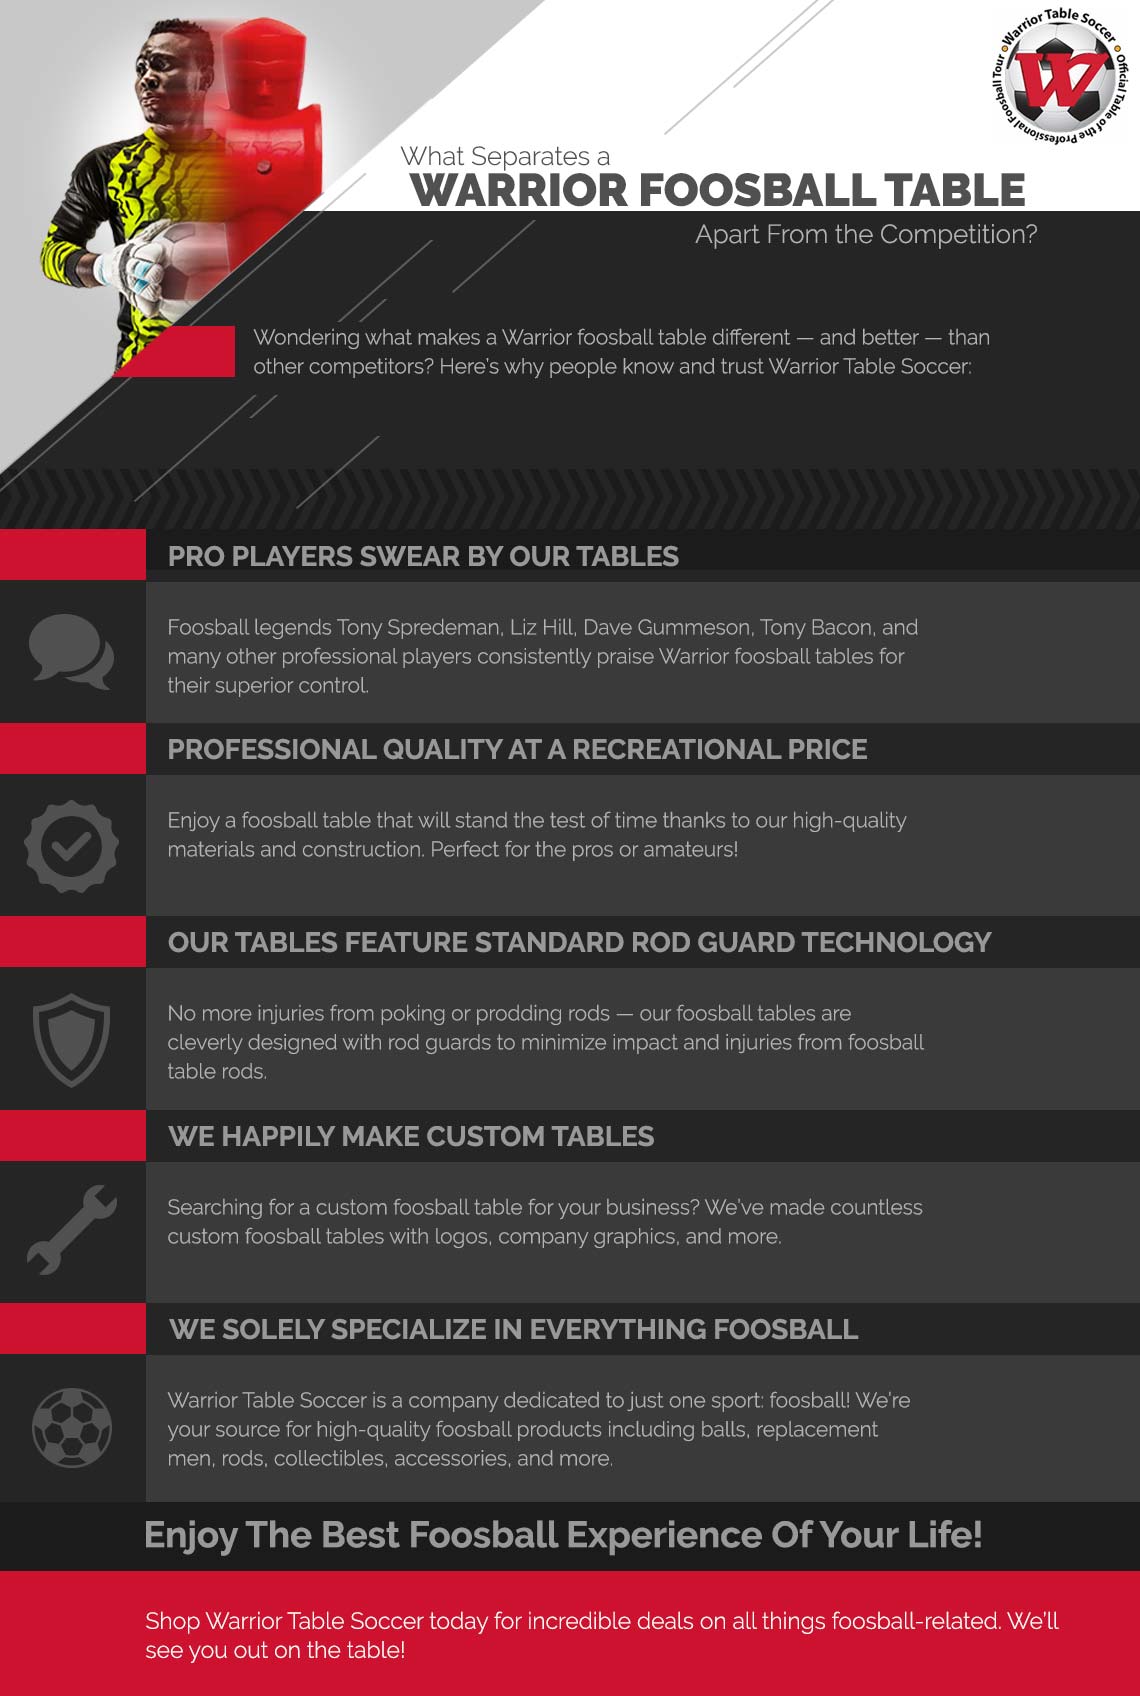 Warrior-Table-Soccer-Infographic